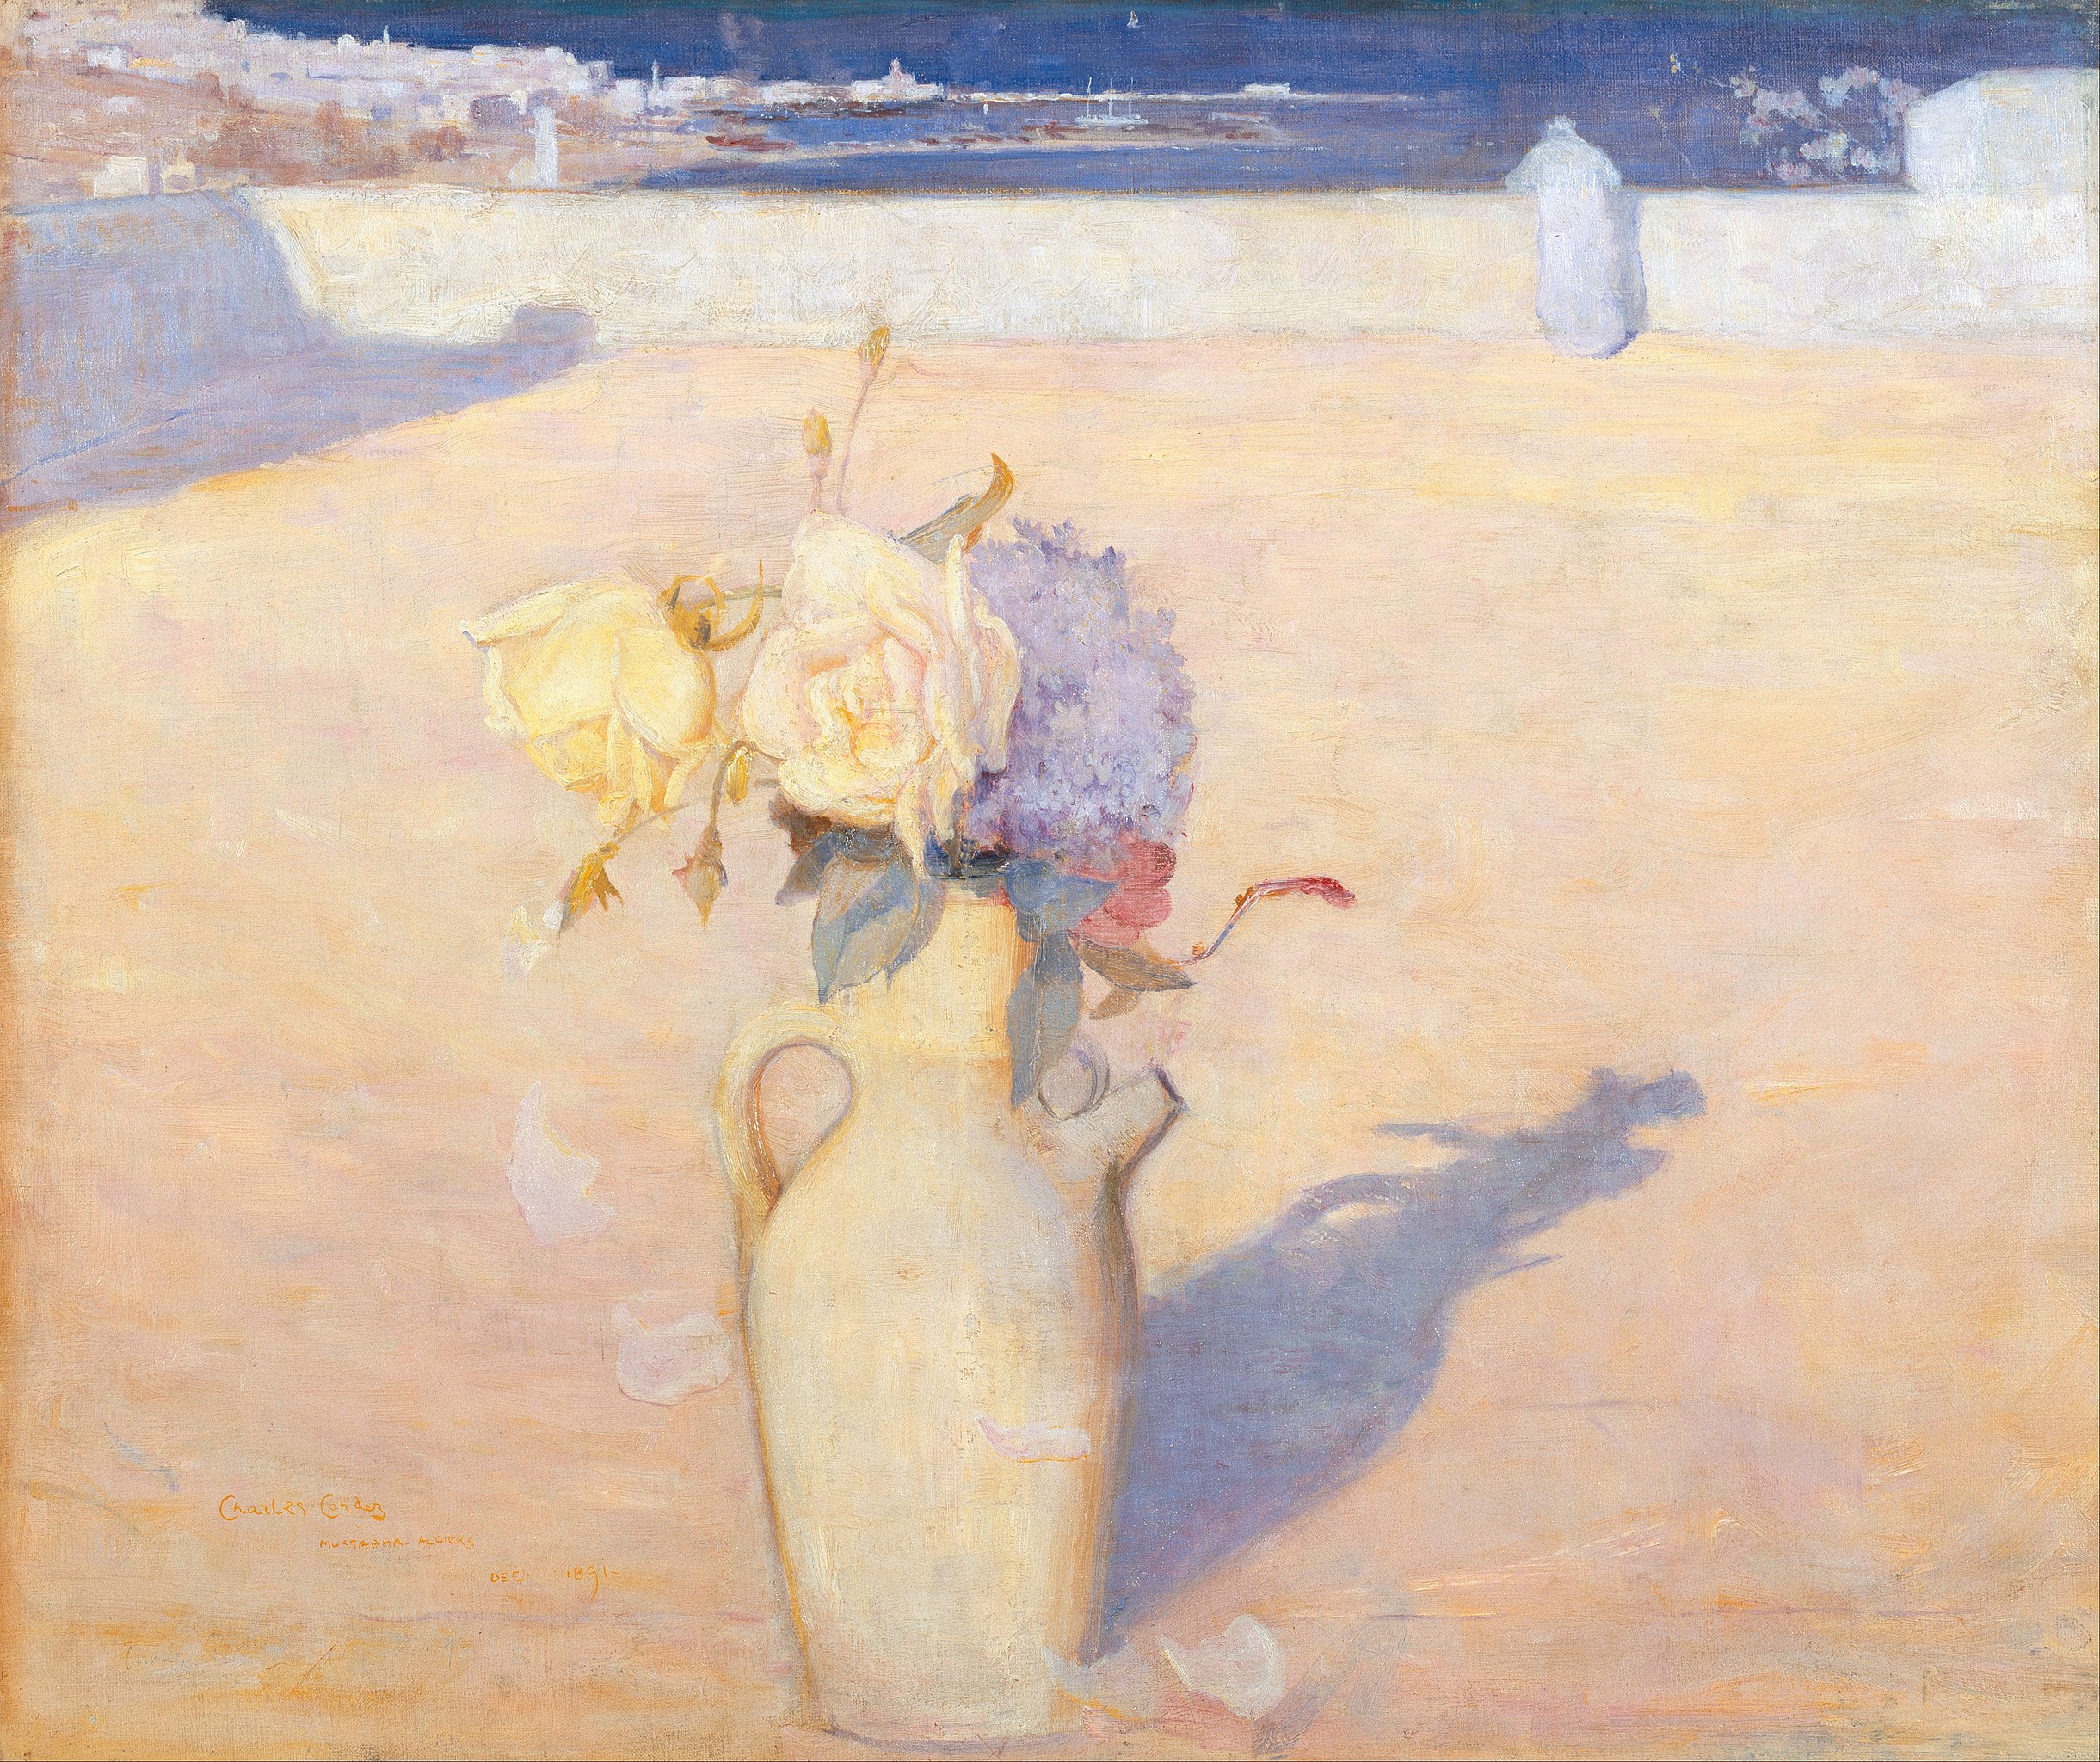 The Hot Sands, Mustapha, Algiers by Charles Conder - 1891 - 63 x 72 cm Art Gallery of New South Wales